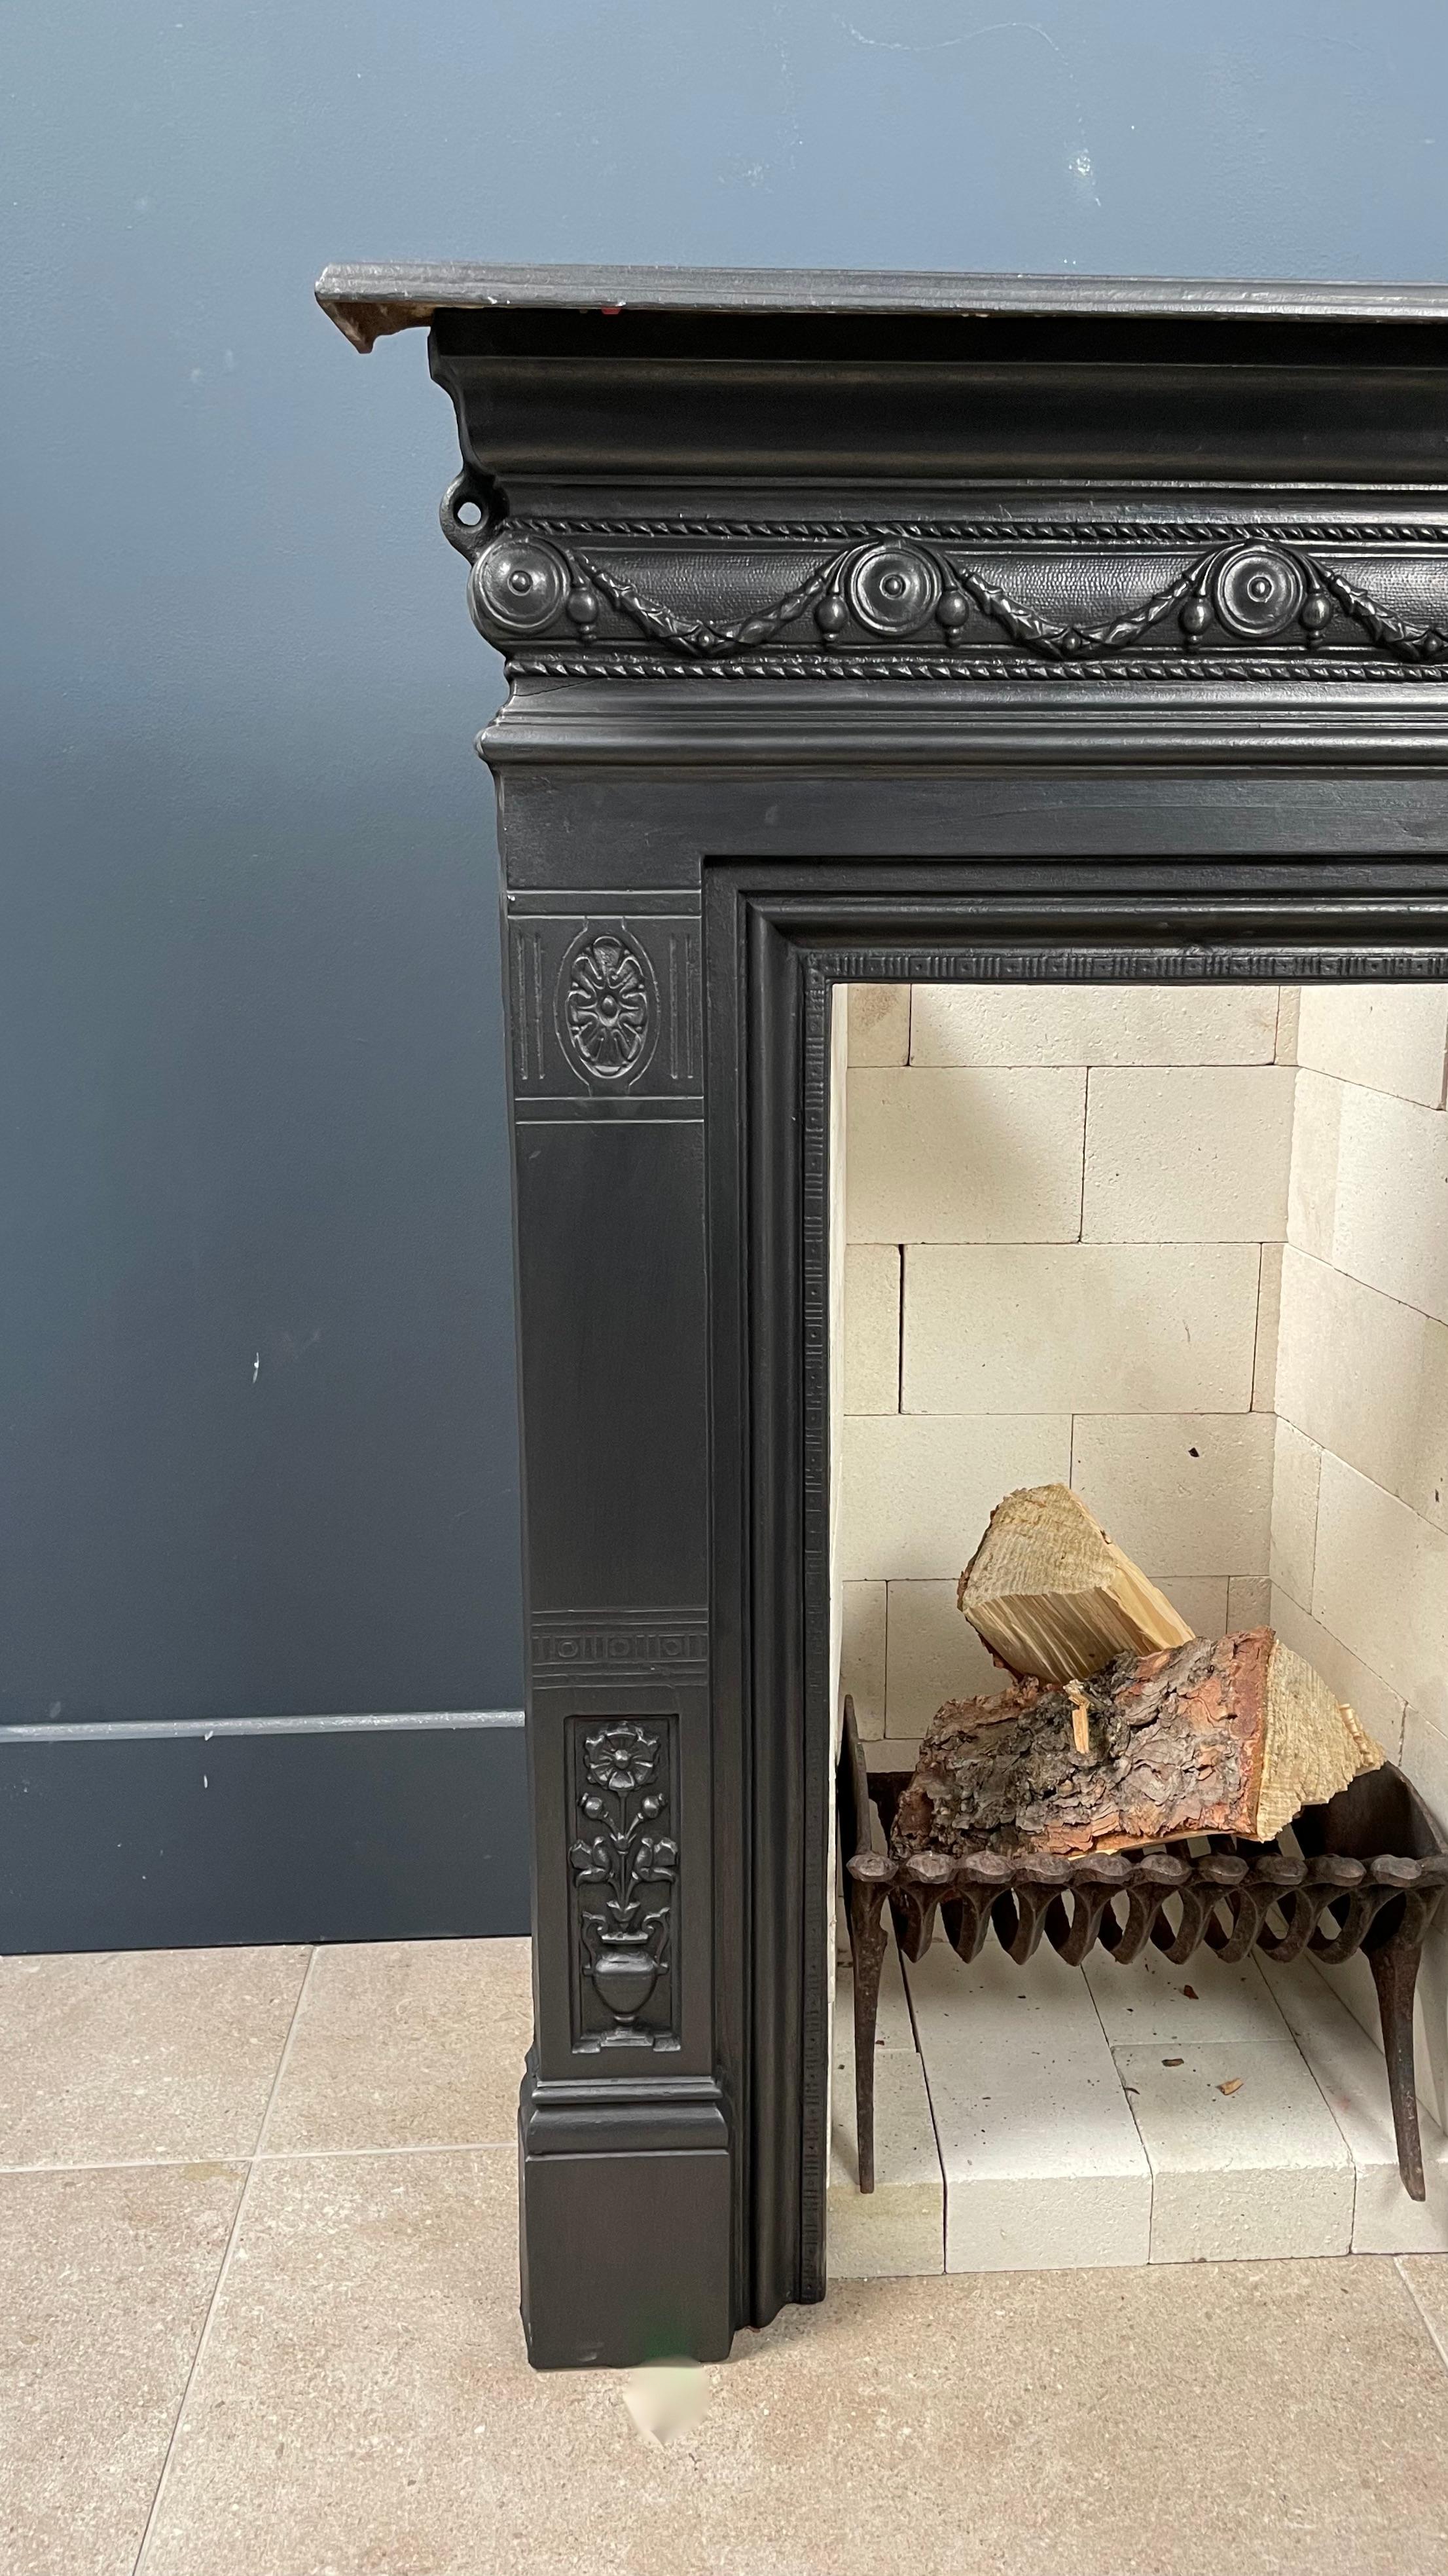 A beautiful antique English cast iron fireplace. This cast iron fireplace can be placed in front of an existing fireplace or can be placed separately. This cast iron fireplace is supplied including white refractory bricks (see photos). The cast iron